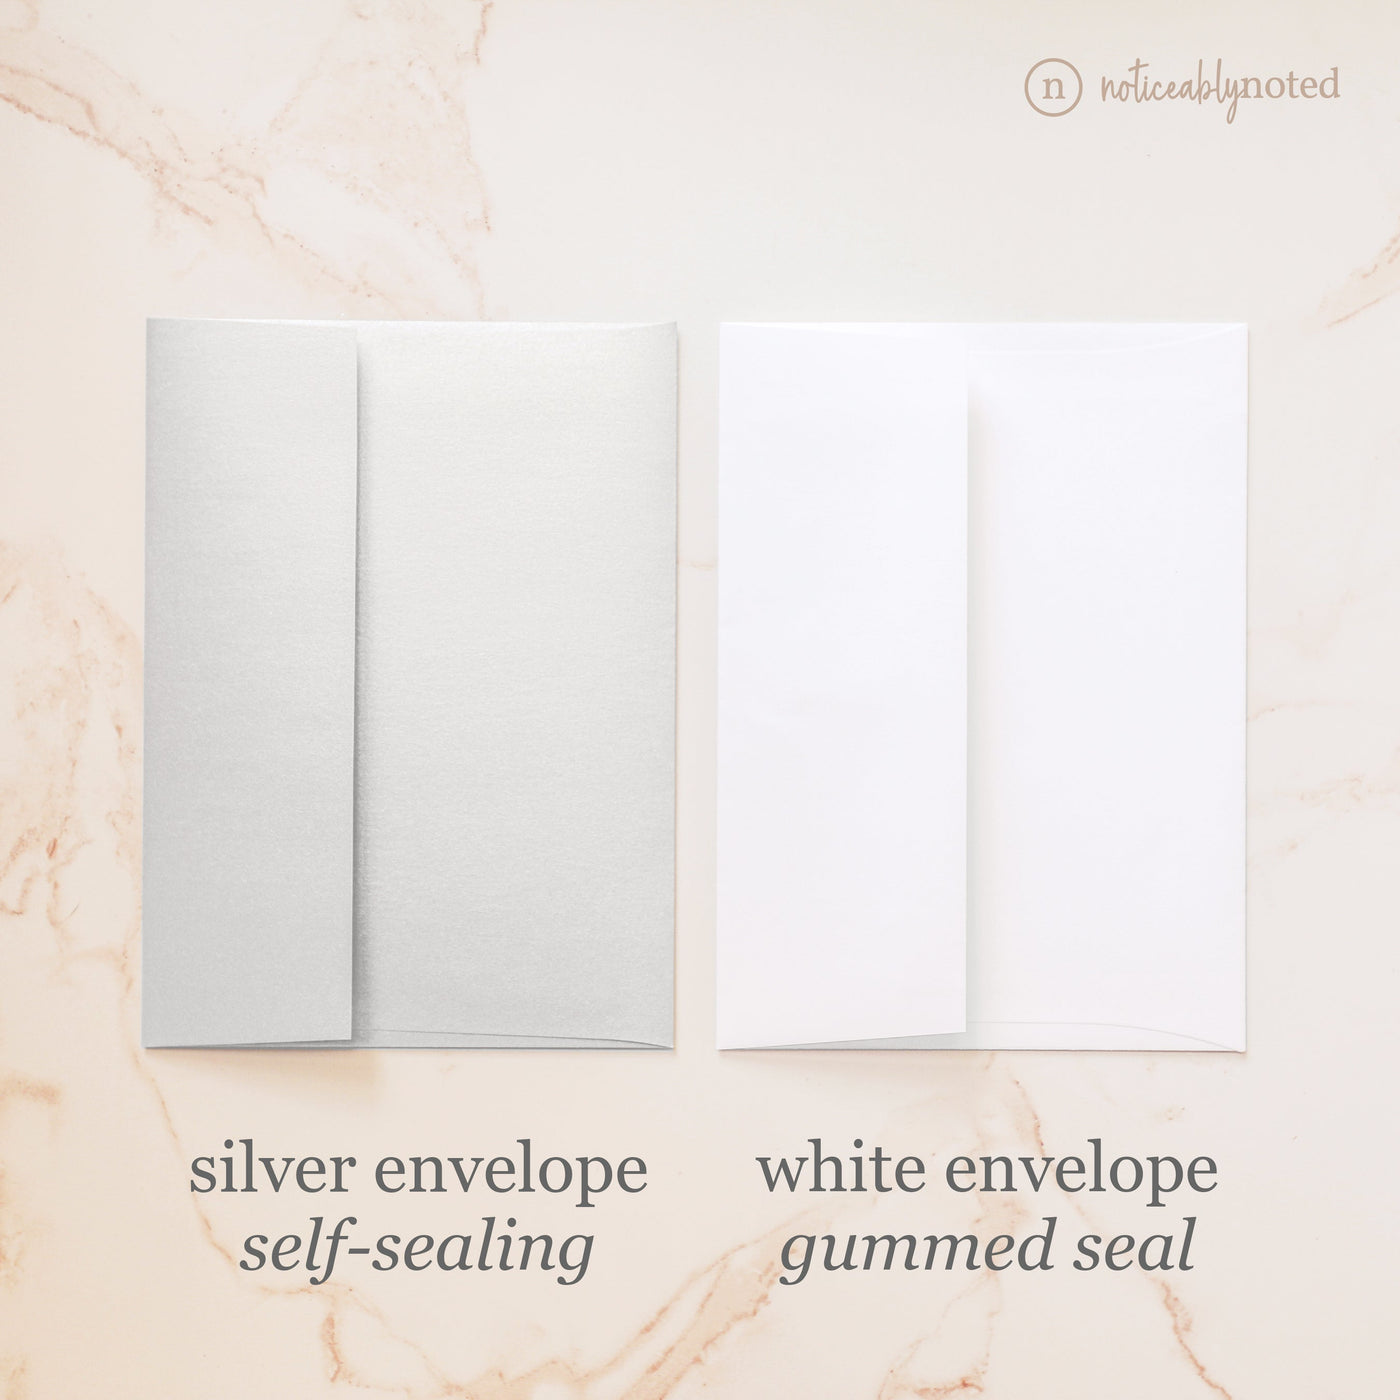 Silver and White Envelope Comparison | Noticeably Noted